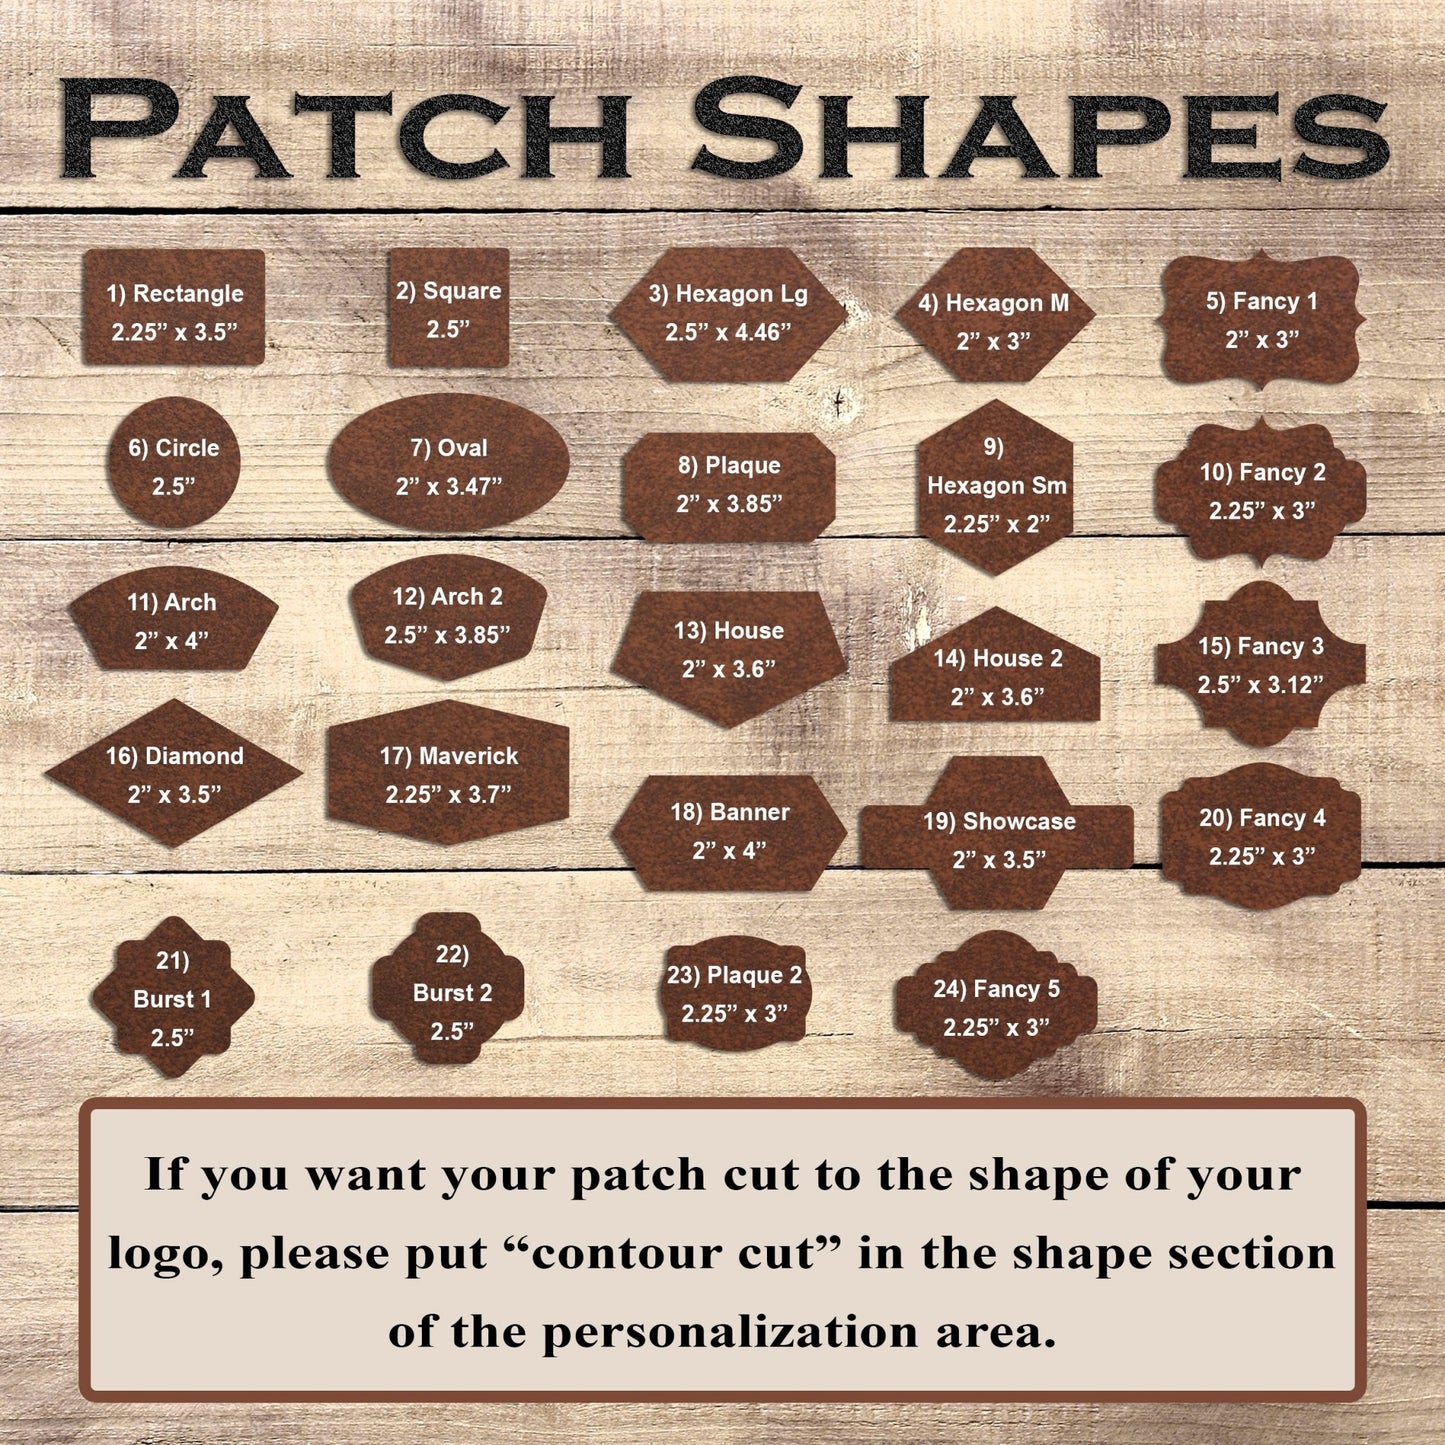 A Basic Guide for Creating Custom Patches on A Budget - Elegant Patches